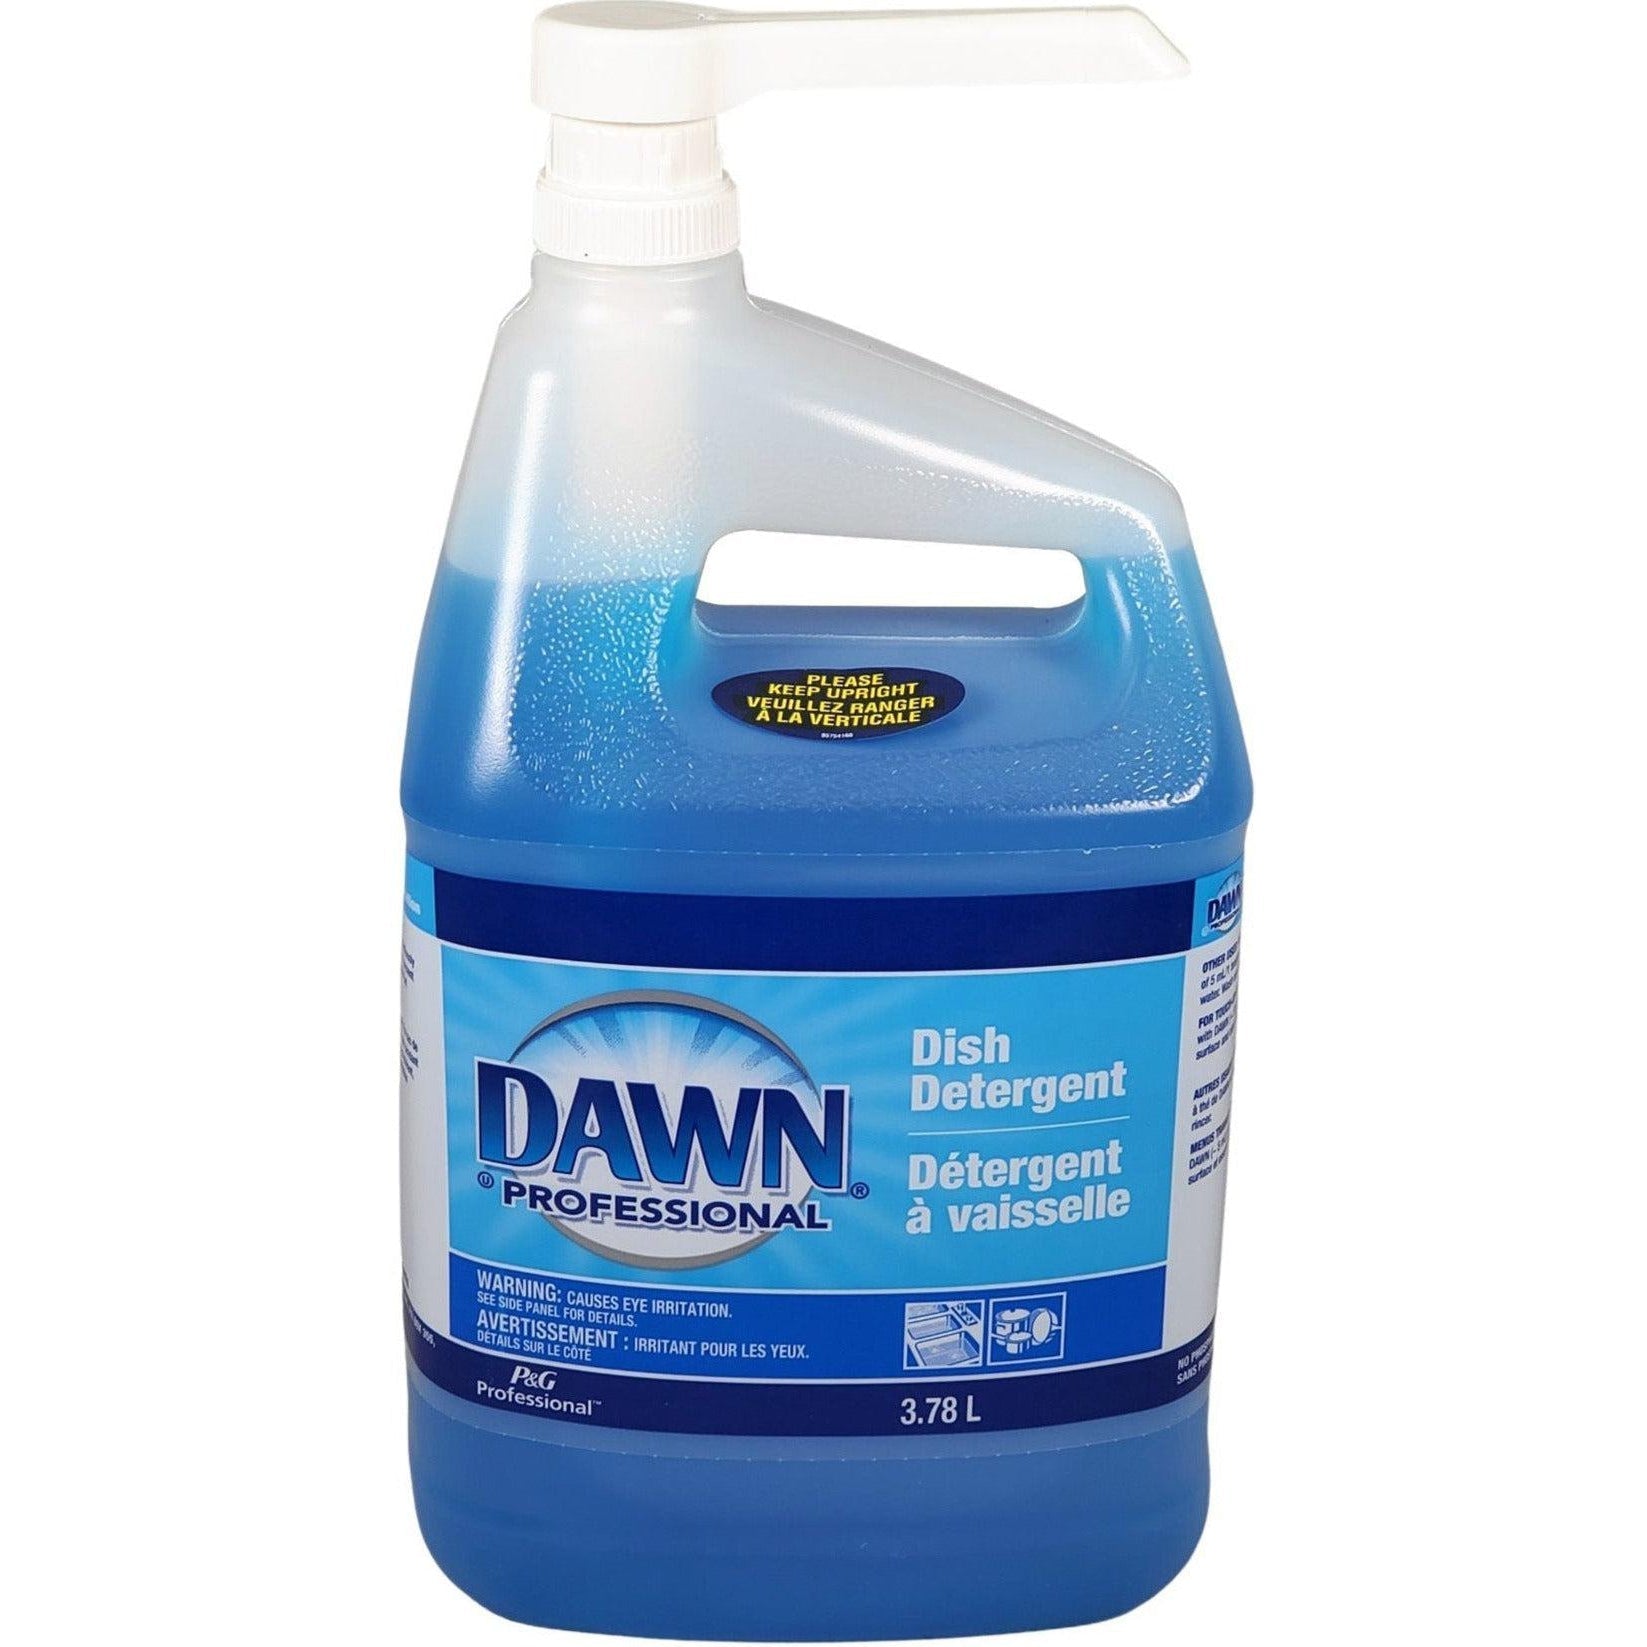 Dawn Dishwashing Products - All Products